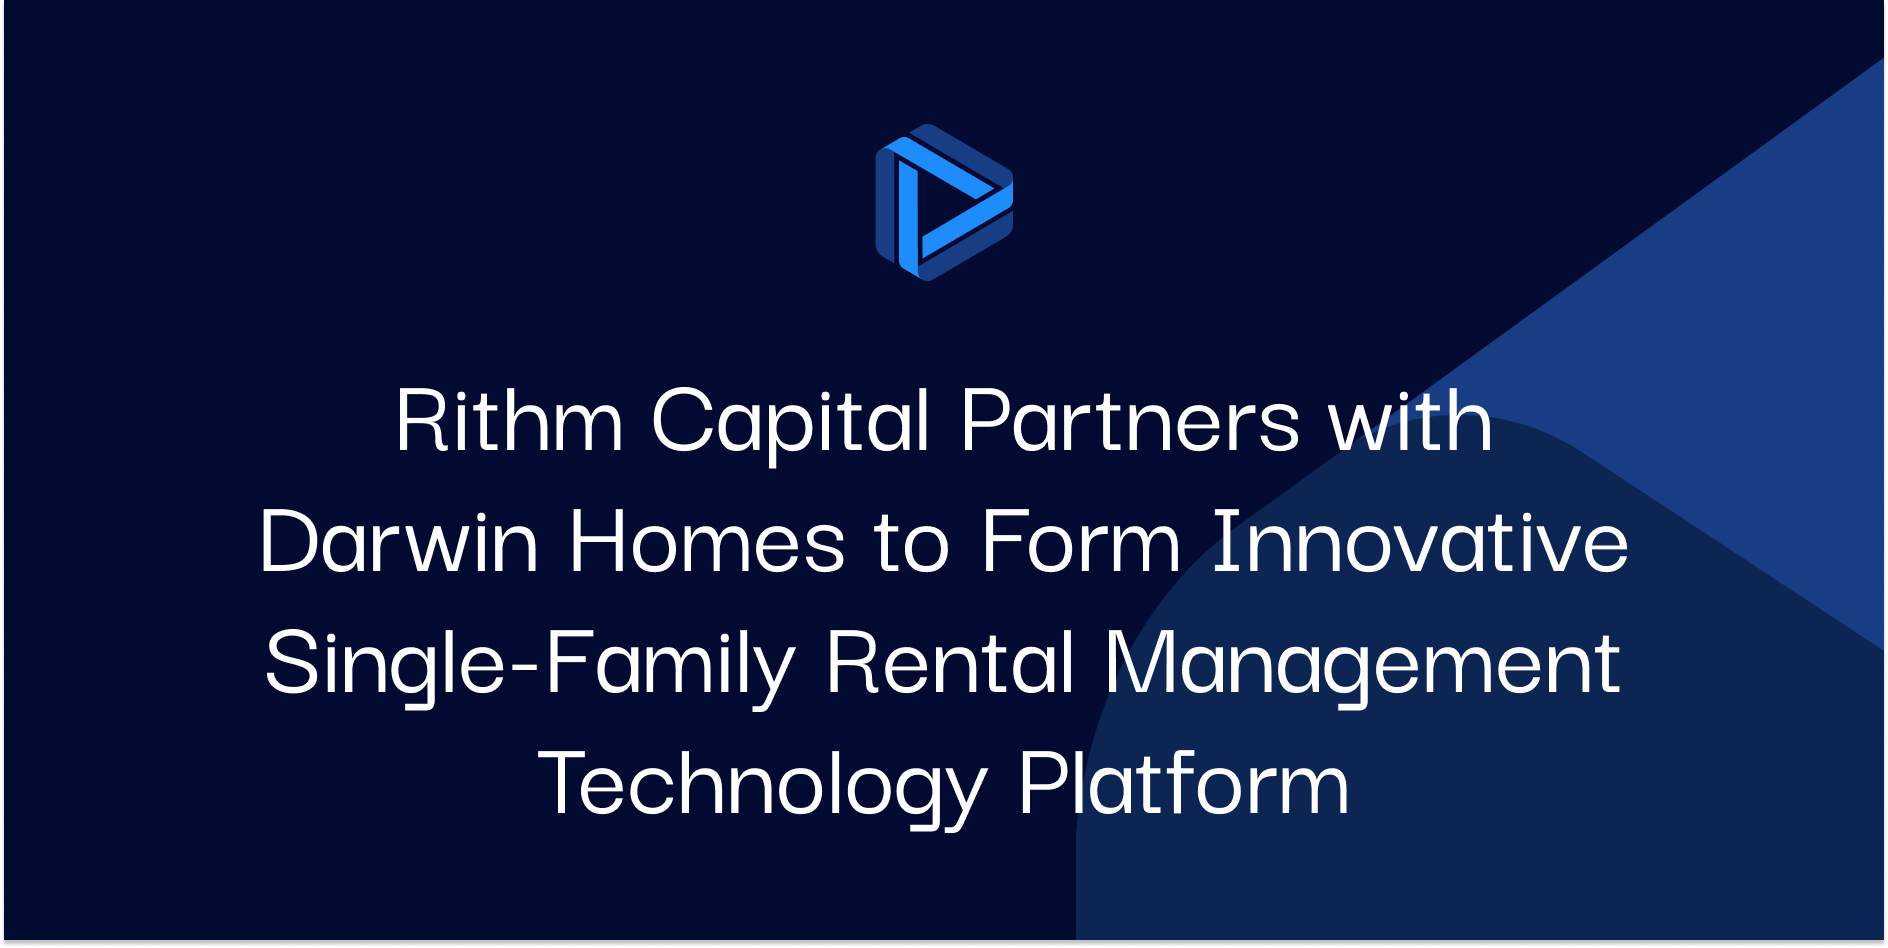 Rithm Capital Partners with Darwin Homes to Form Innovative Single-Family Rental Management Technology Platform